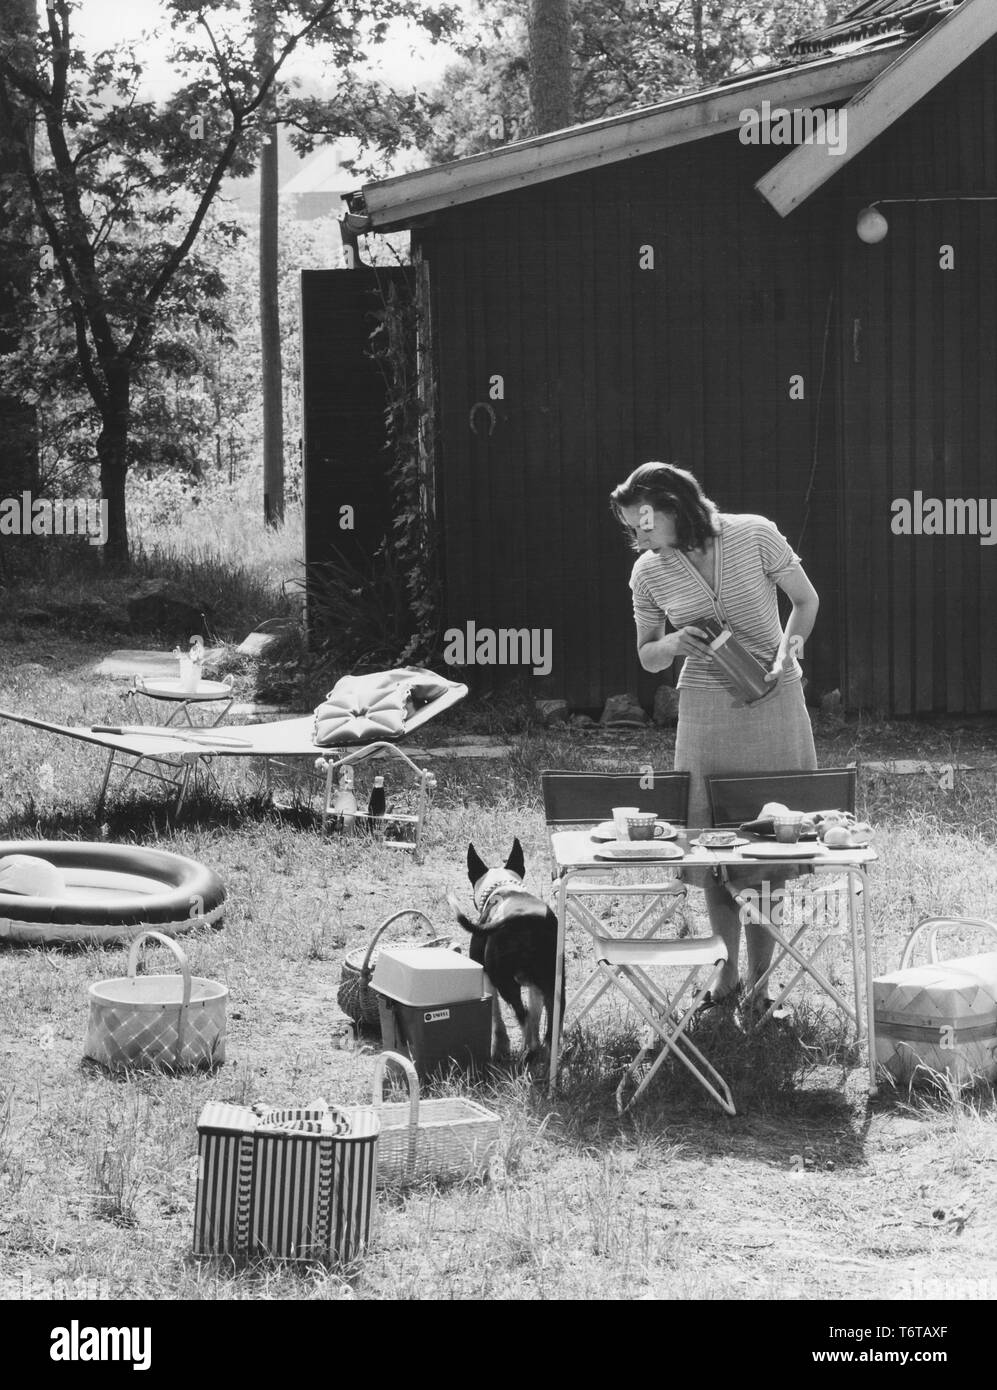 Camping in the 1960s. When camping in the 1960s plastic cups and other camping equipment were sometimes packed and transported in special cases. Pictured a practical such and a woman setting the table for a meal in the nature. The chairs and the table are typical camping folding ones, that could easily be stored and transported, not to take up too much room in the trunk of the car. Every visible object in the picture represents the 1960s decade. Both in material and design. Sweden 1963 Stock Photo